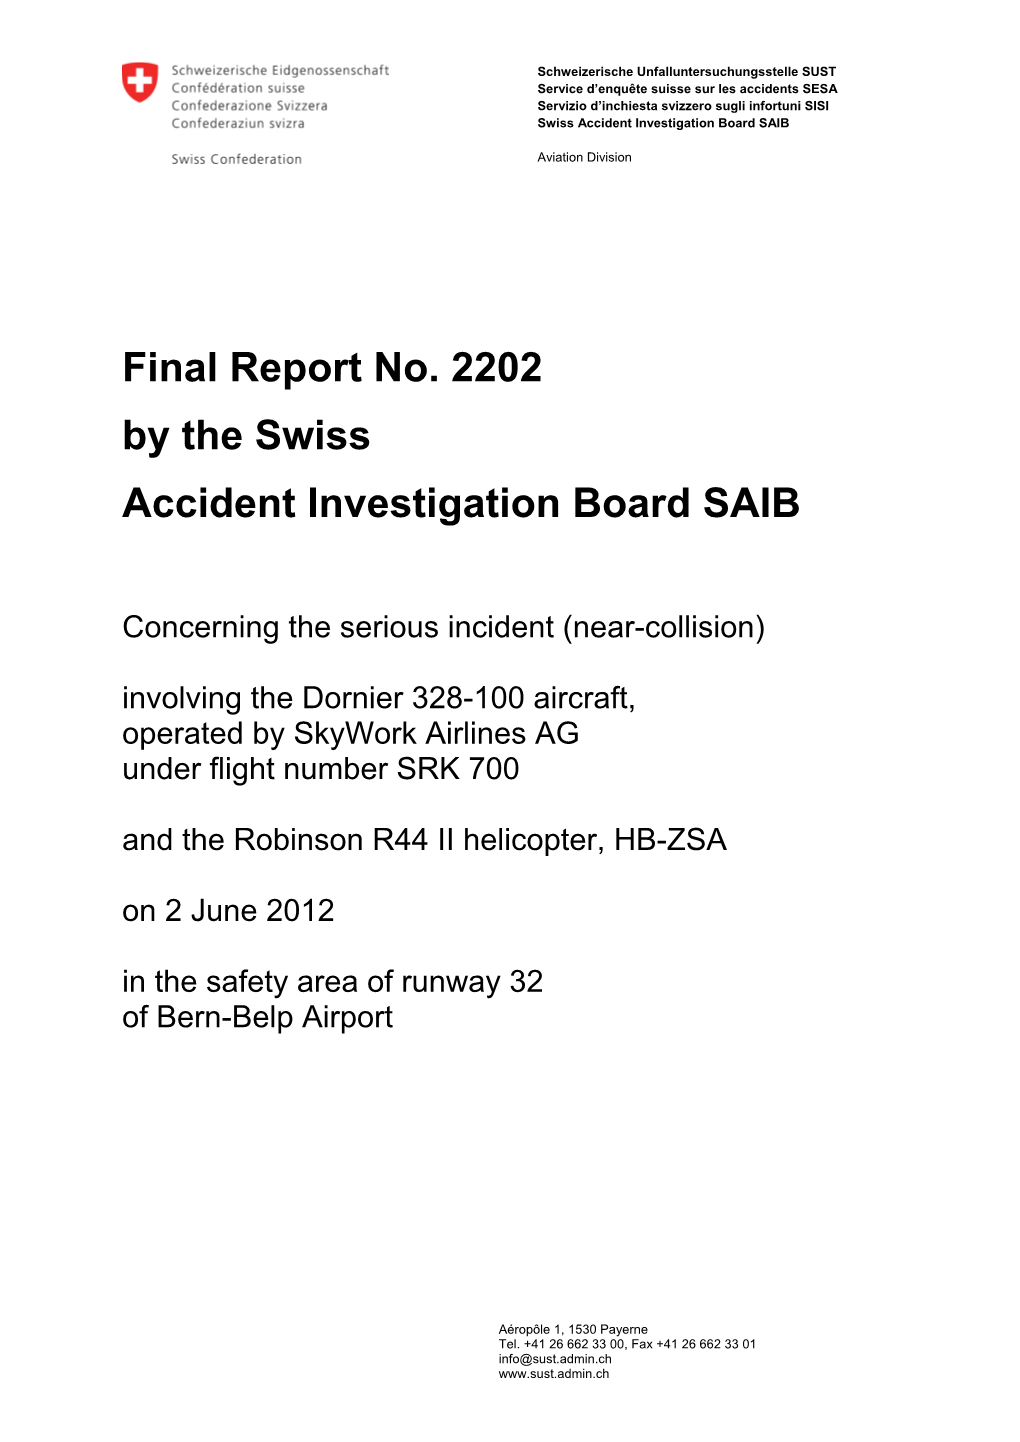 Final Report No. 2202 by the Swiss Accident Investigation Board SAIB